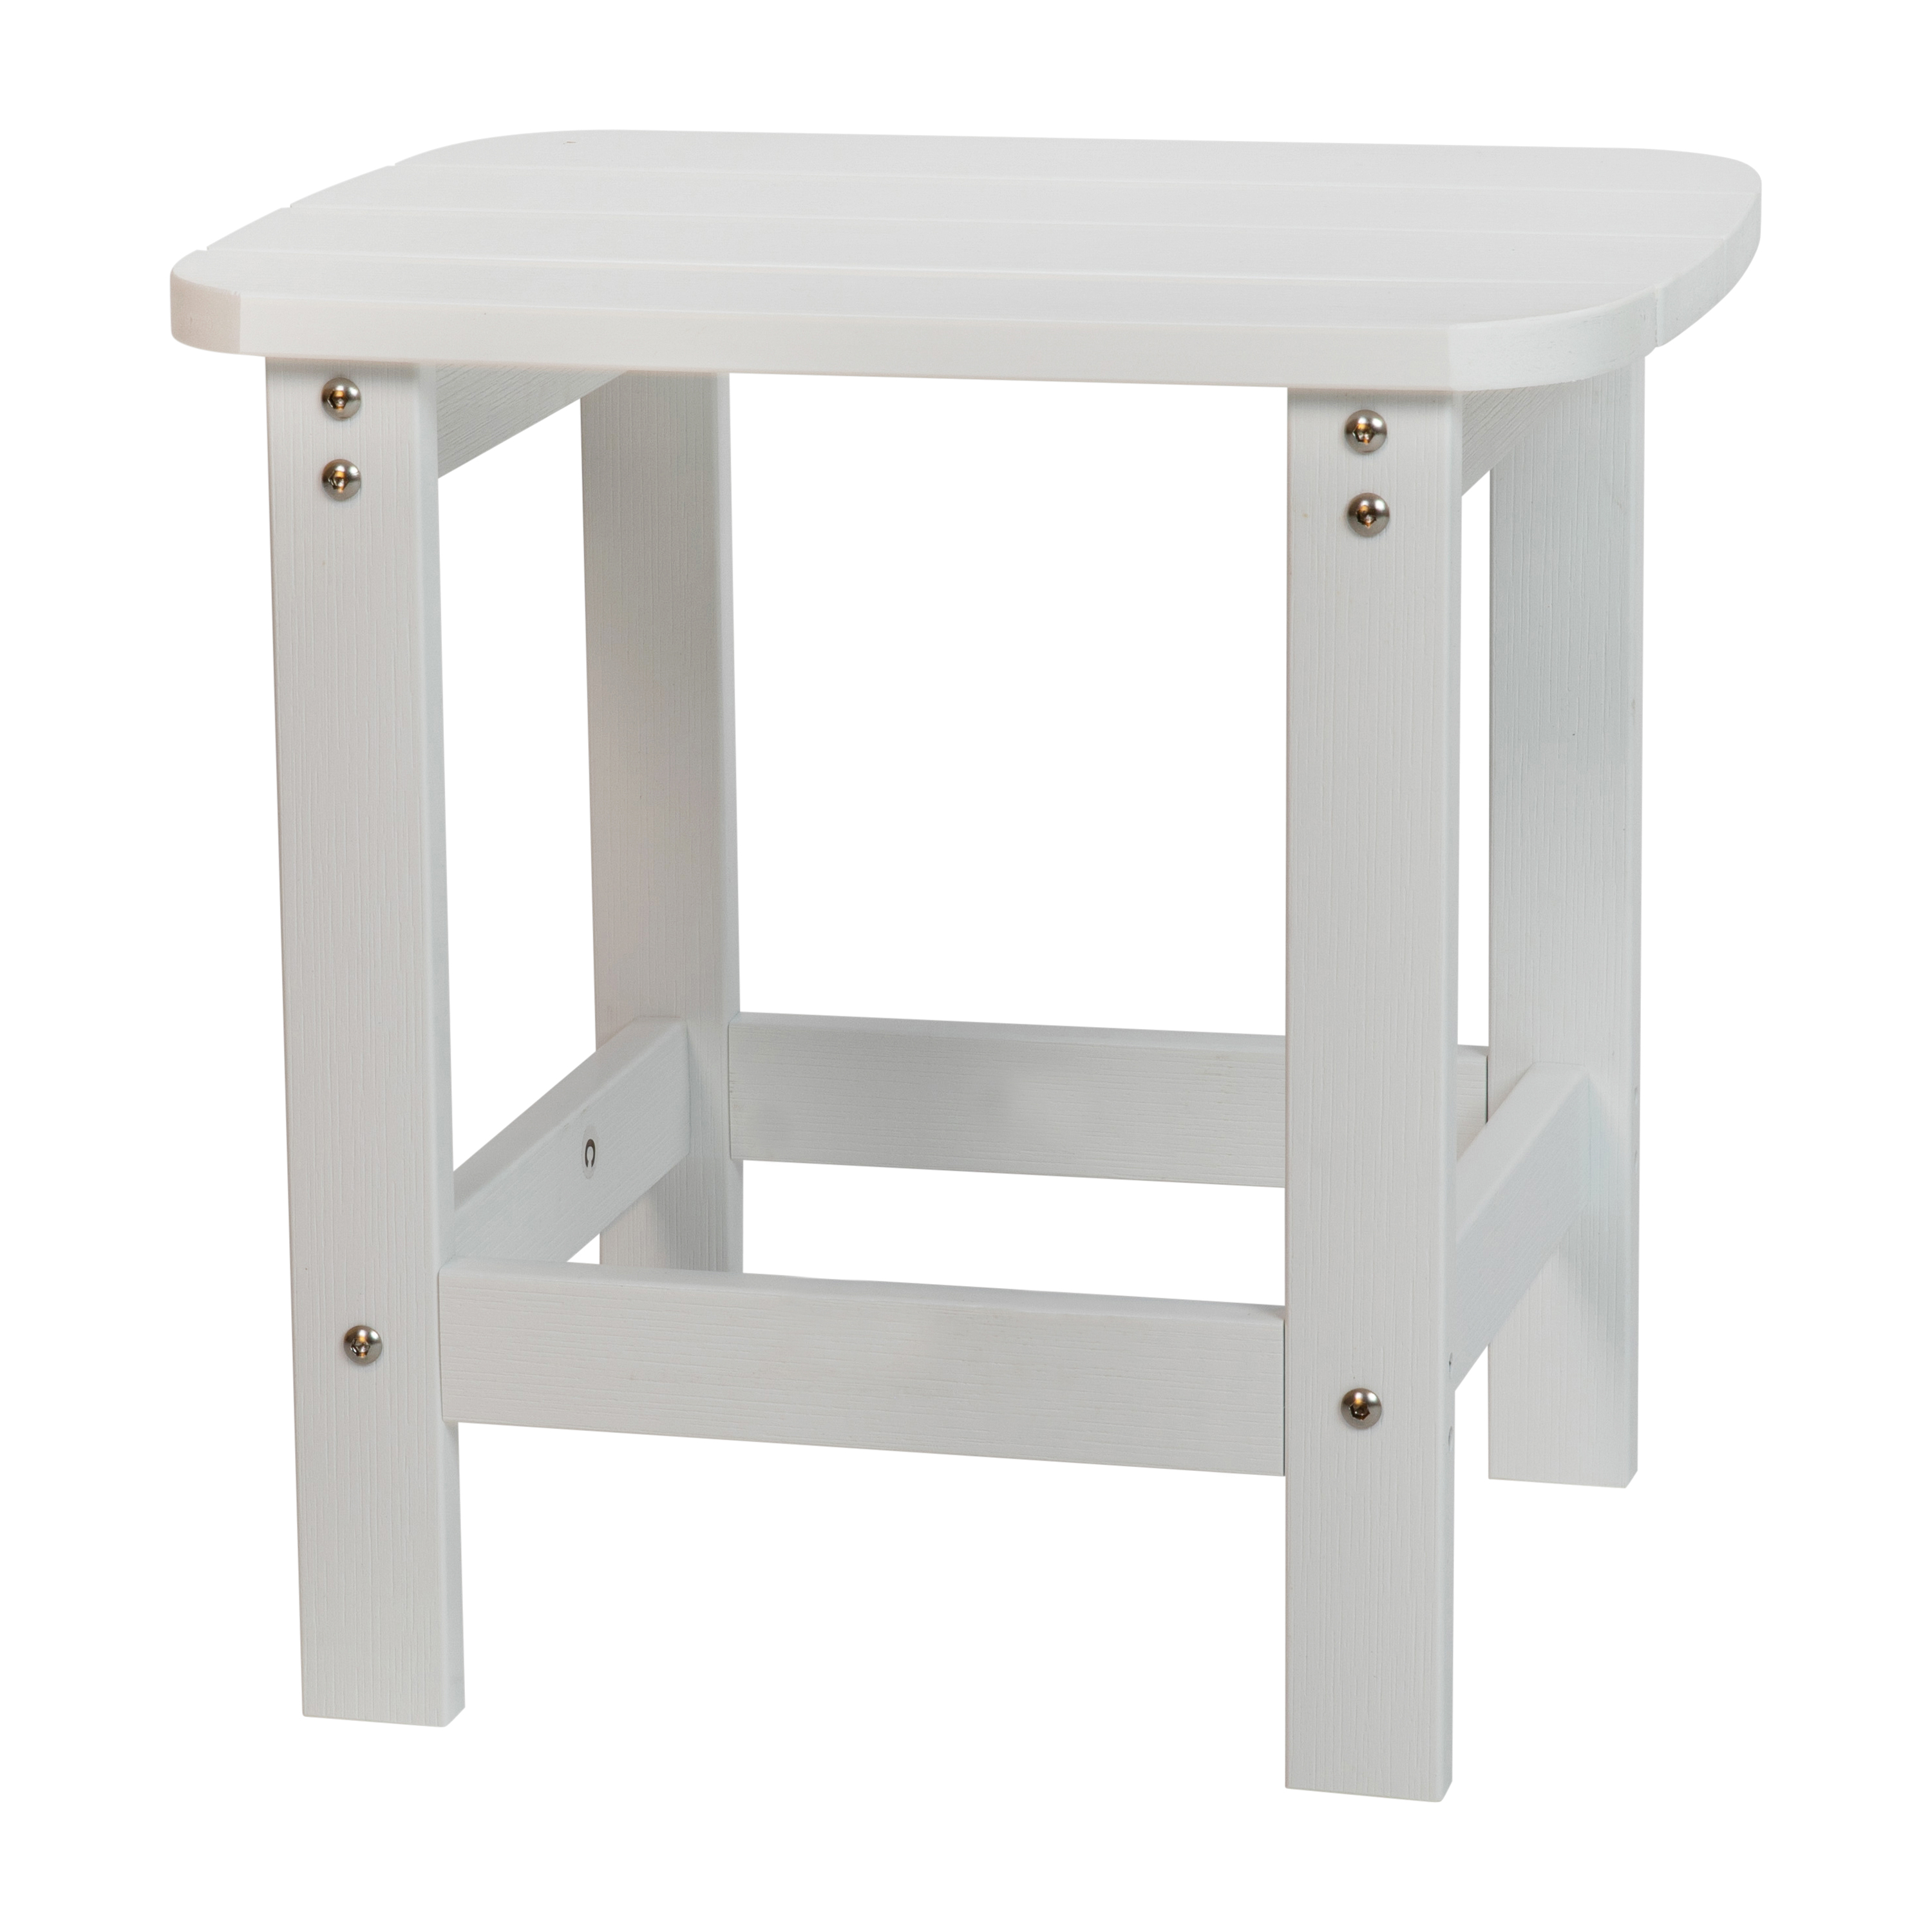 Emma + Oliver Indoor/Outdoor Polyresin Adirondack Side Table for Porch, Patio, or Sunroom in White - image 2 of 9